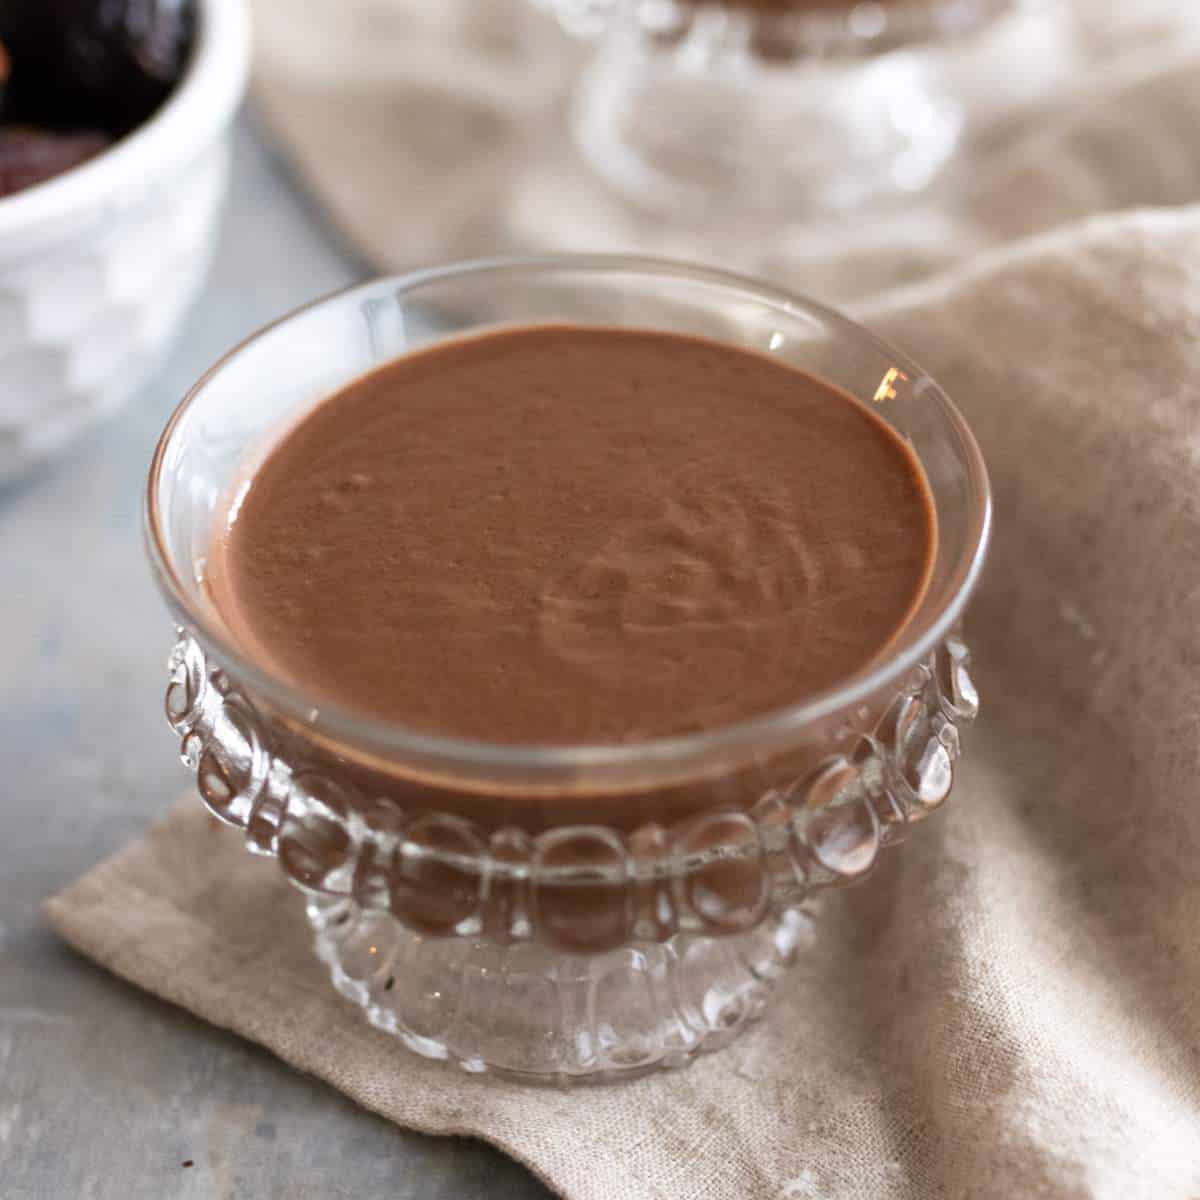 Chocolate pudding in a small glass dessert dish.